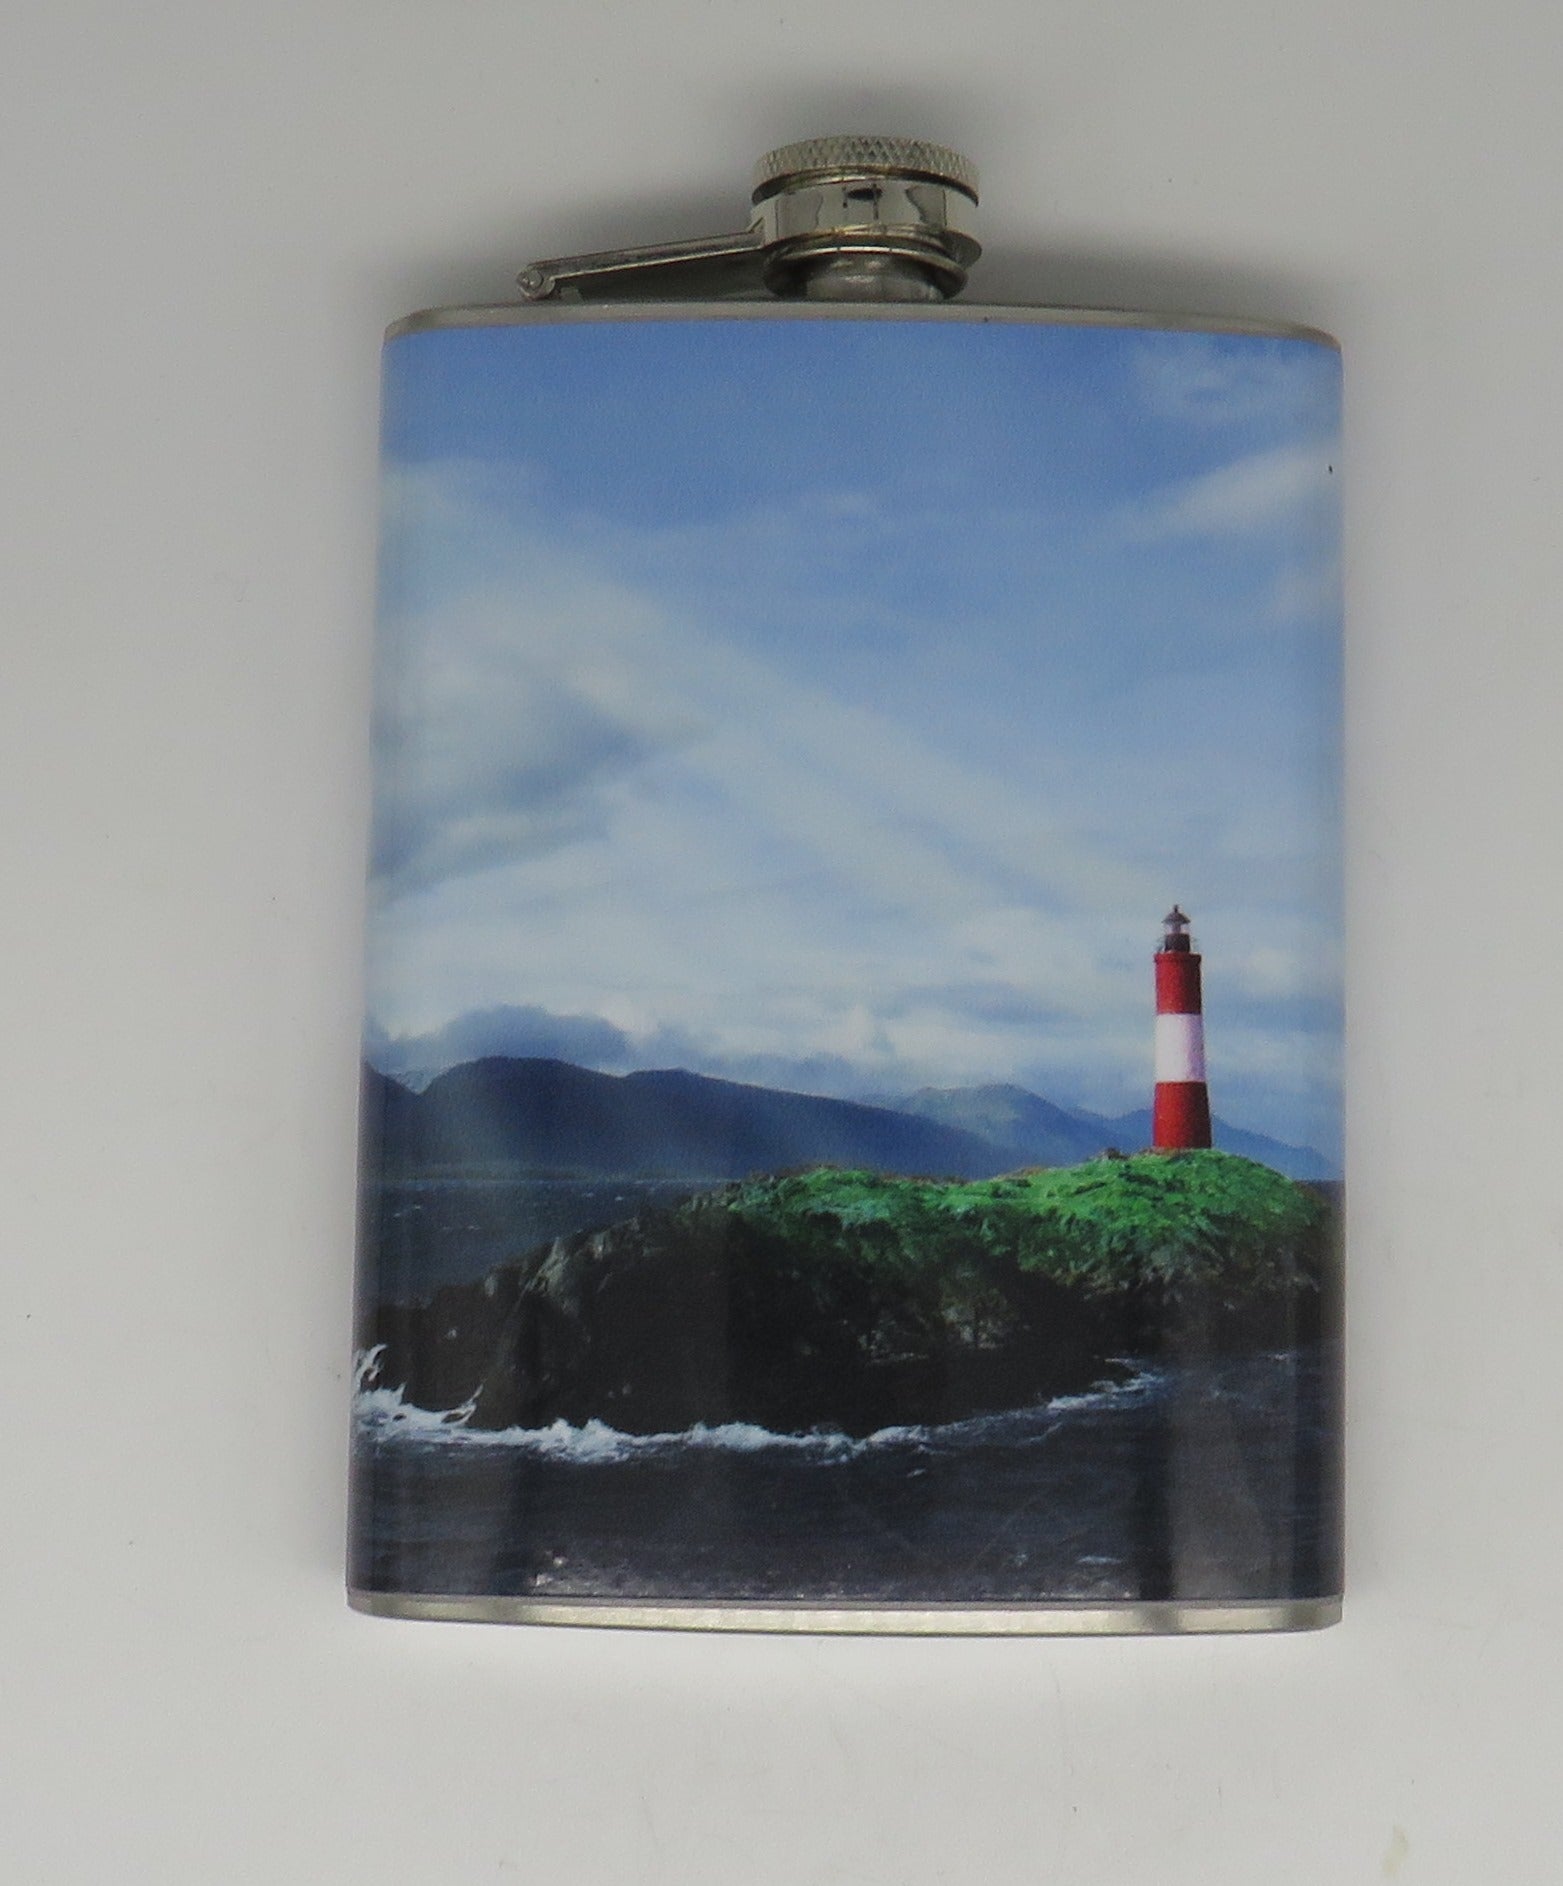 Nautical Lighthouse Mountain View Flask Stainless Steel